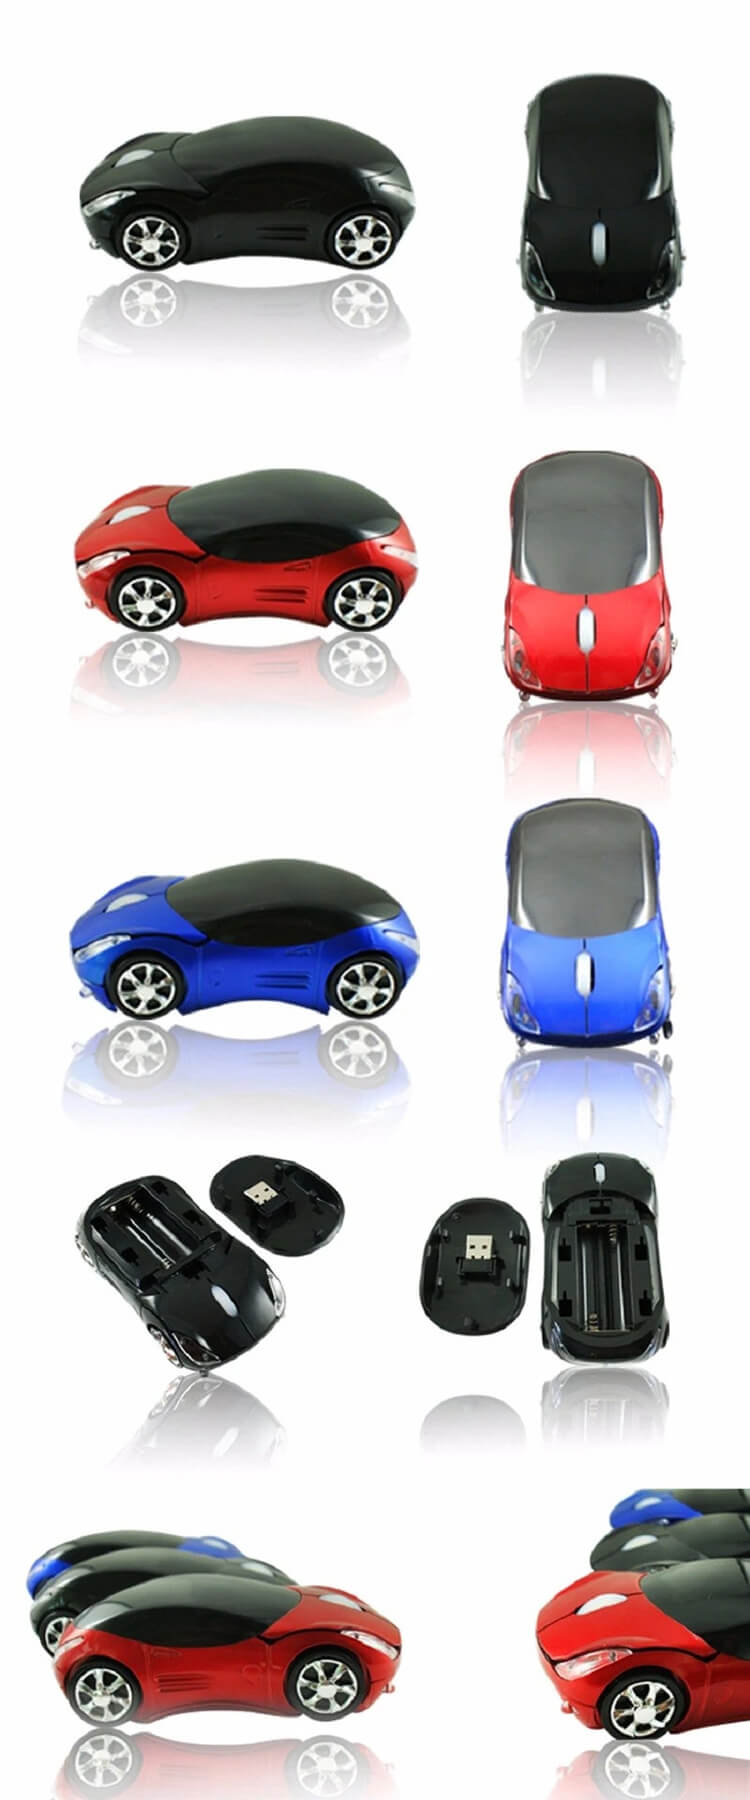 Wireless-Sports-Car-Styling-Mouse-800-1200-Dpi-Optical-Cordless-Mouse-for-PC-Computer-Notebook.webp (3).jpg